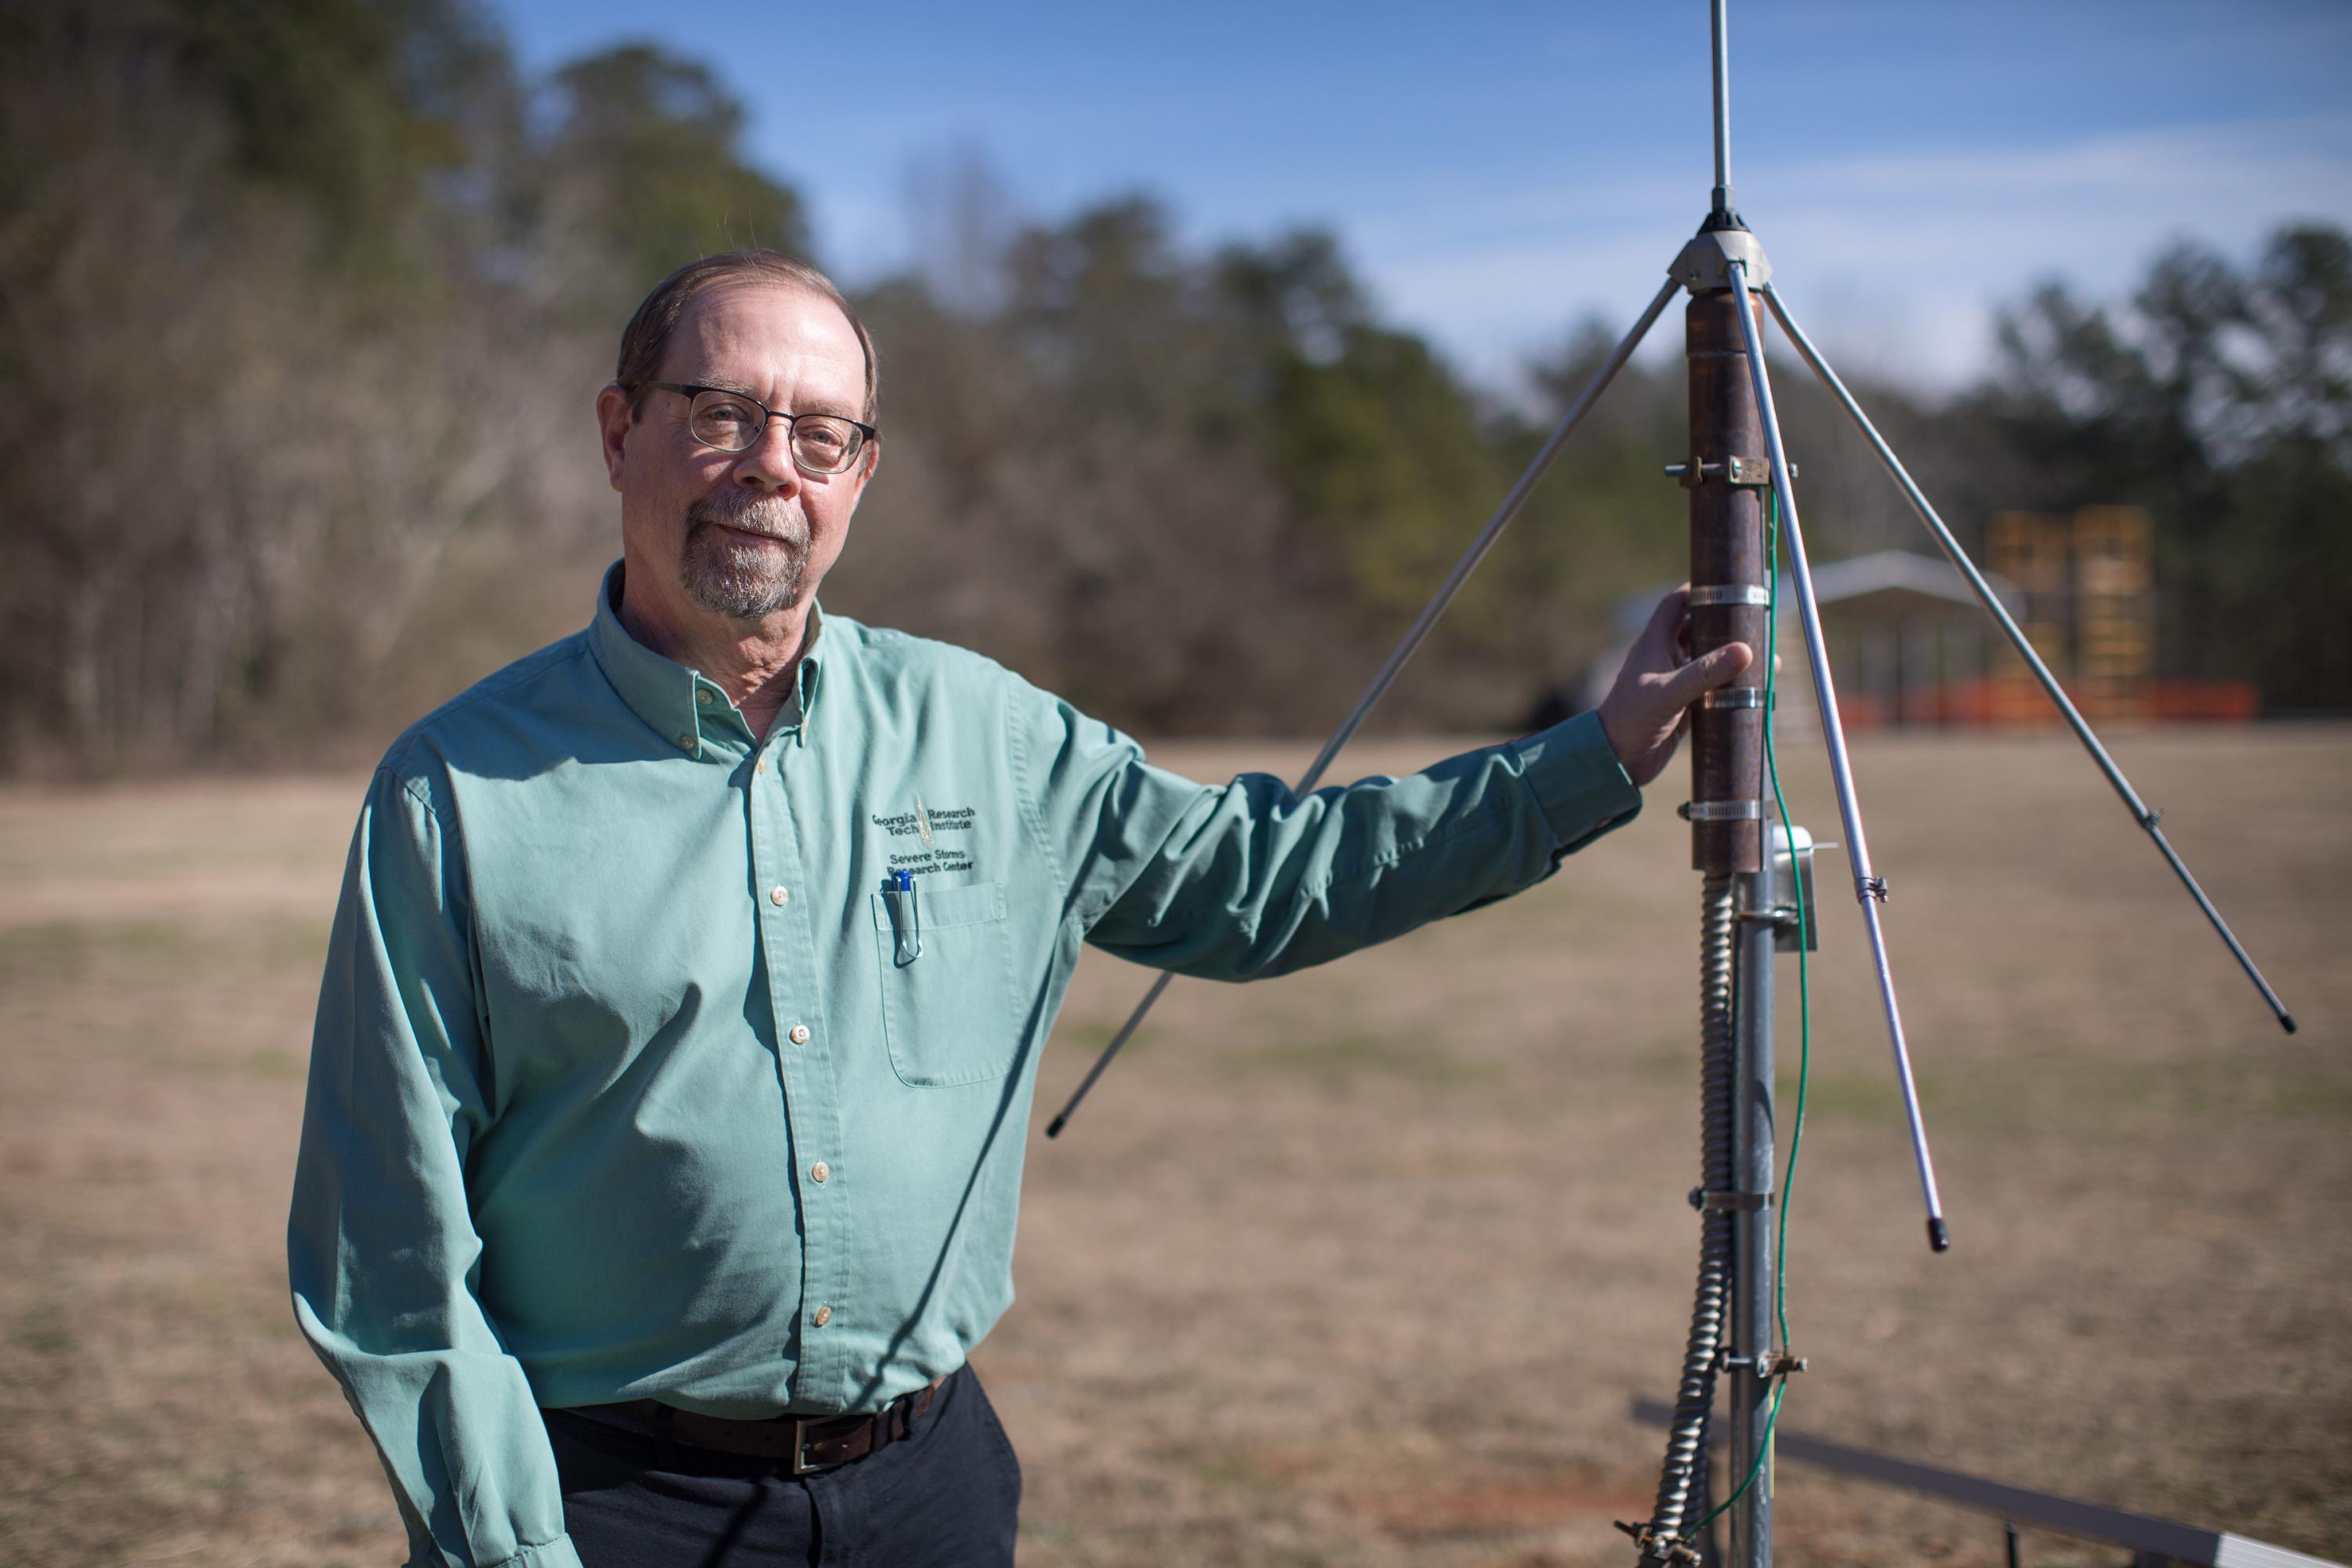 John Trostel, director of the Severe Storms Research Center (SSRC), poses with a sensor that is part of the North Georgia Lightning Mapping Array, a network of 12 such sensors located around the metropolitan Atlanta area to detect lightning that may indicate storm intensification. (Credit: Branden Camp, Georgia Tech Research Institute)